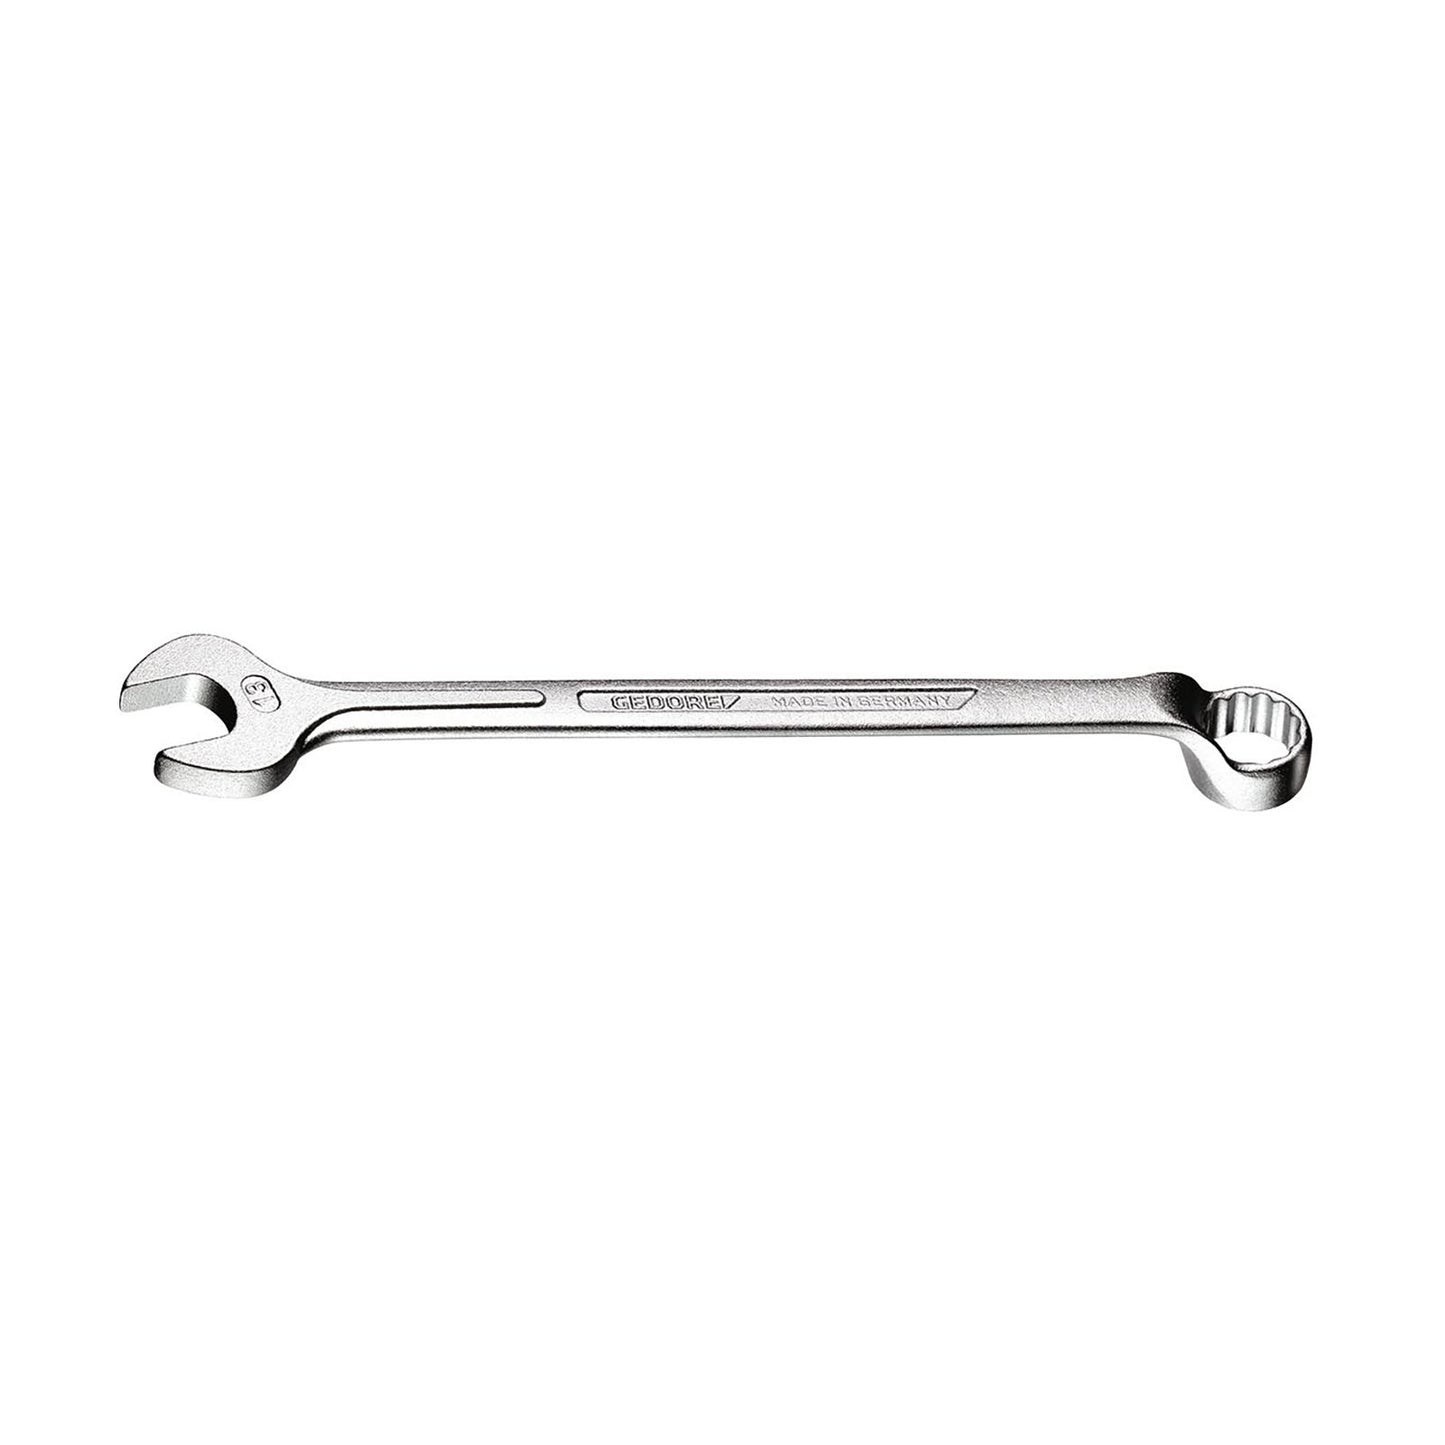 GEDORE 1 B 3/8W - Offset Combination Wrench, 3/8W (6009970)